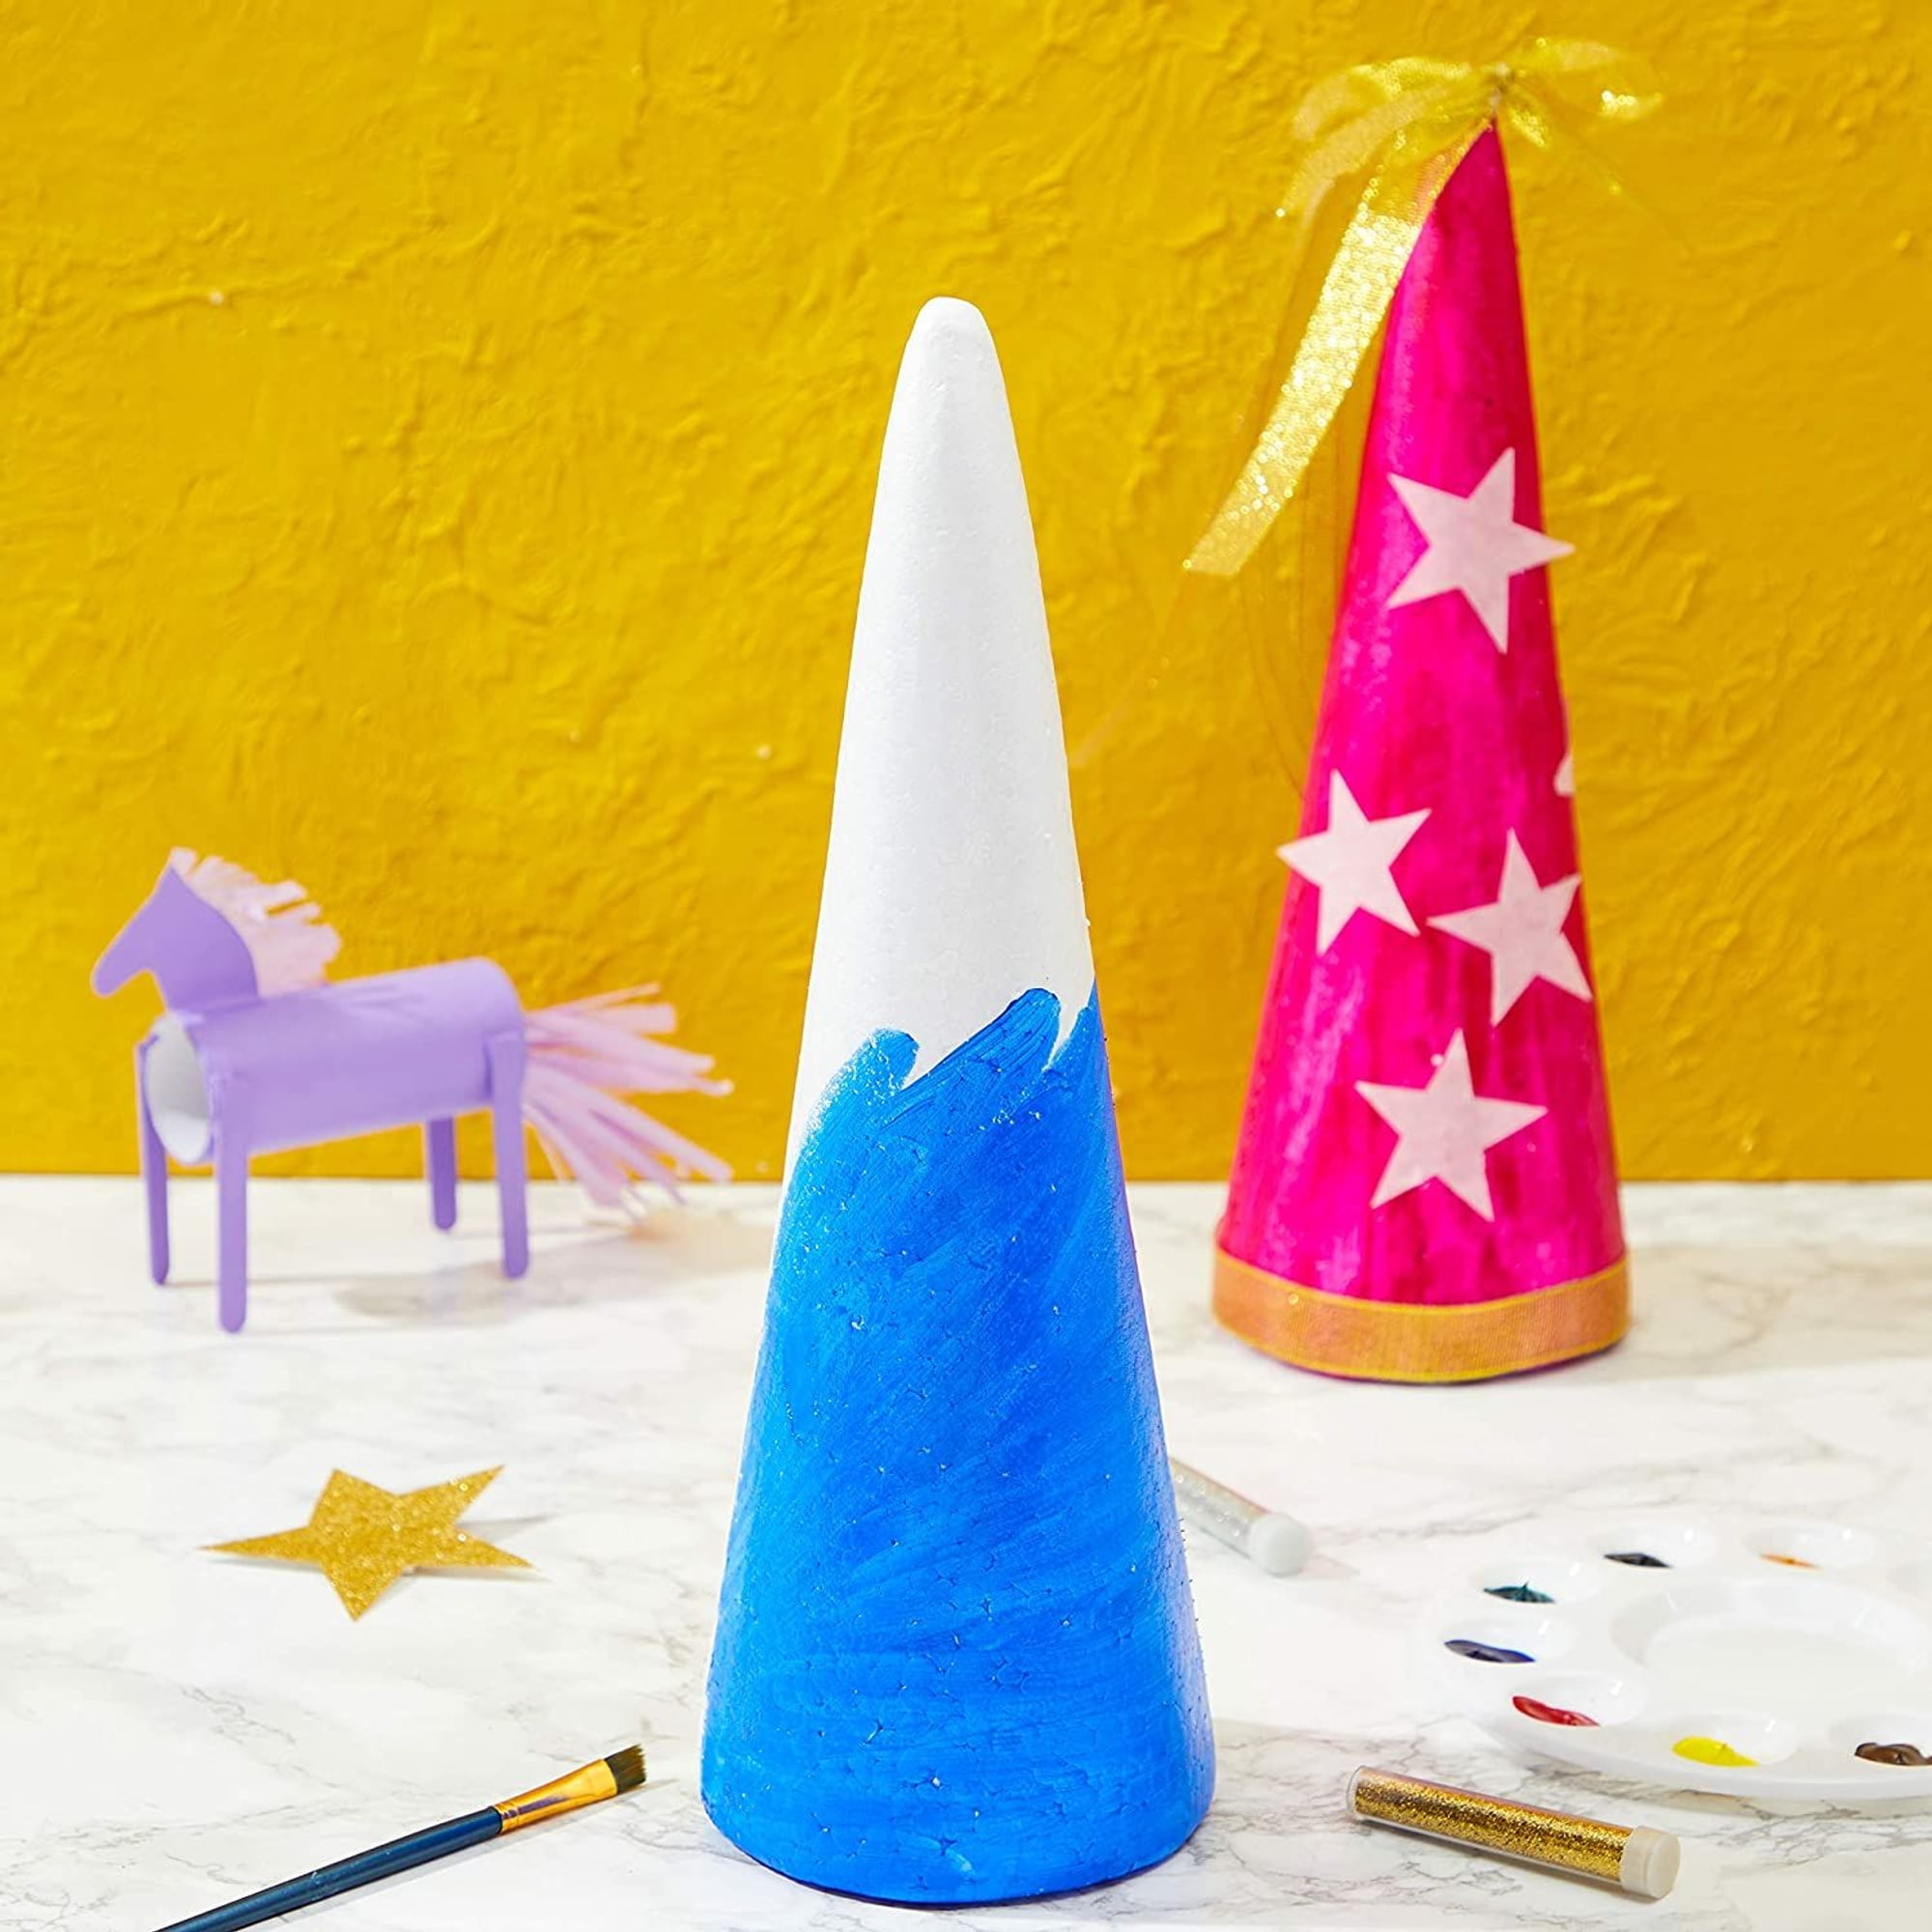 Bright Creations 6 Pack Foam Cones - Arts And Crafts Supplies, Diy Handmade  Gnomes, Christmas Tree Decor, 3.8 X 9.5 In : Target